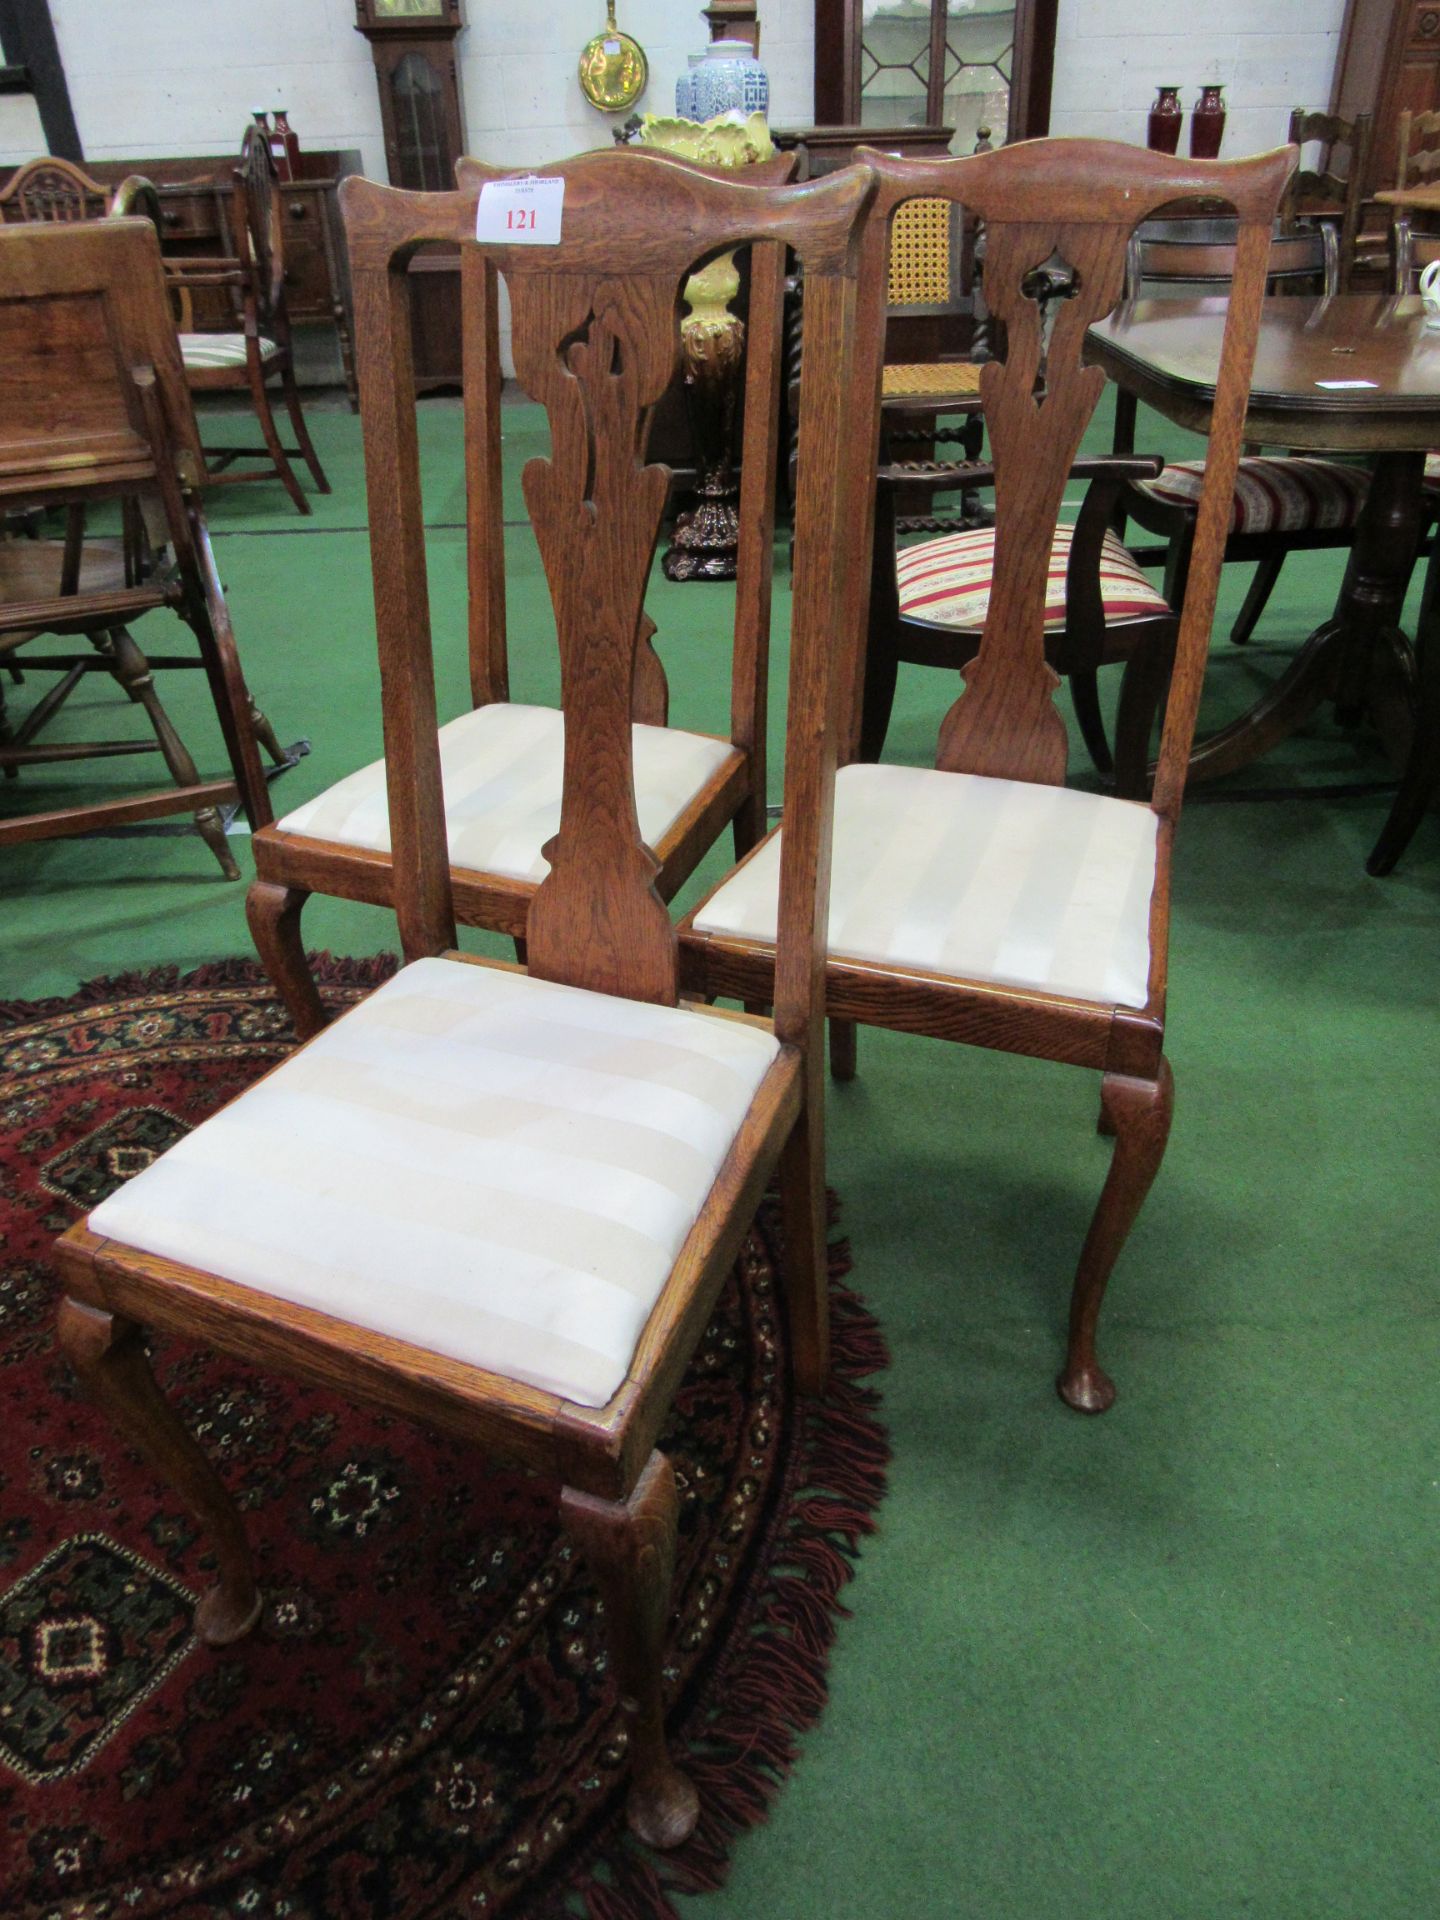 3 oak high back chairs with drop-in seats.